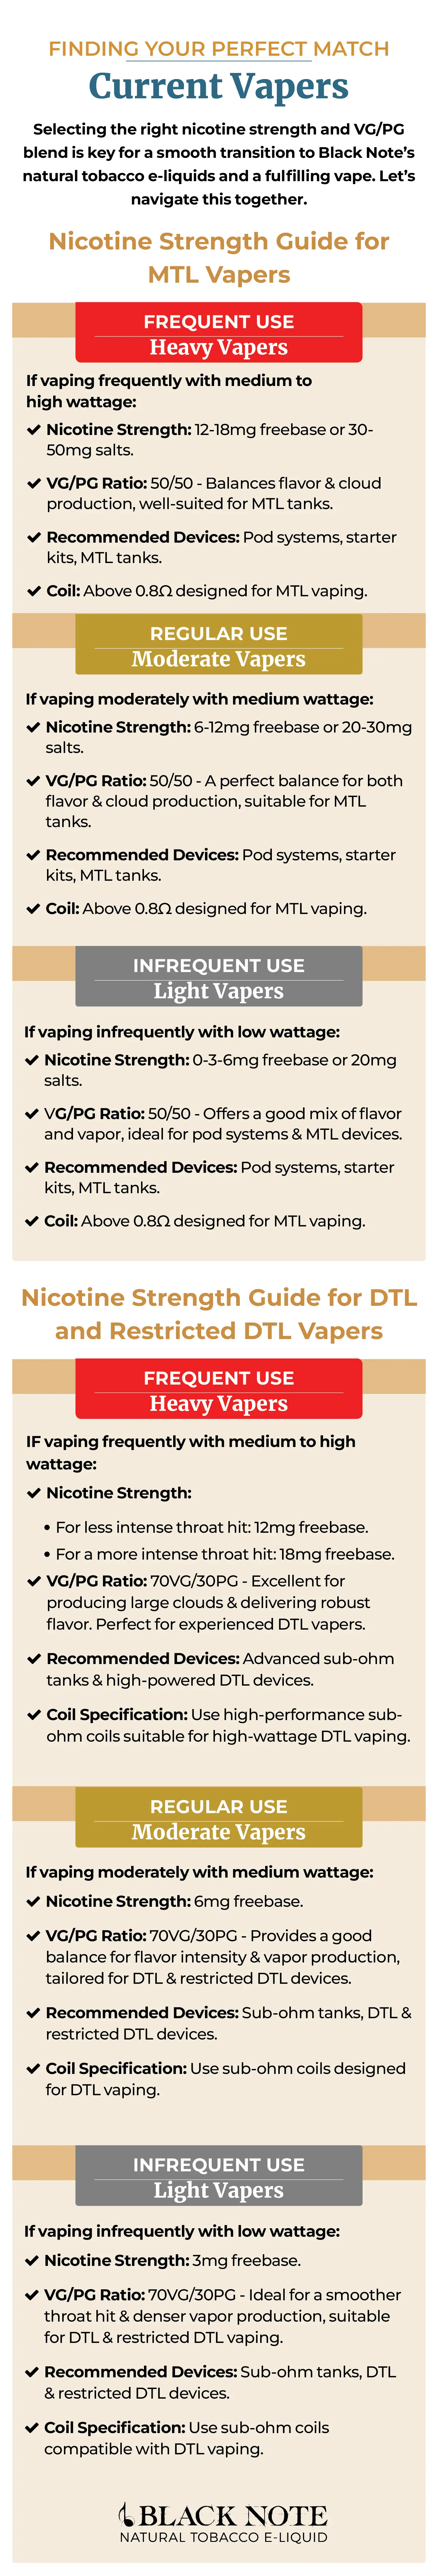 Infographic helping vapers find a perfect vape match with Black Note